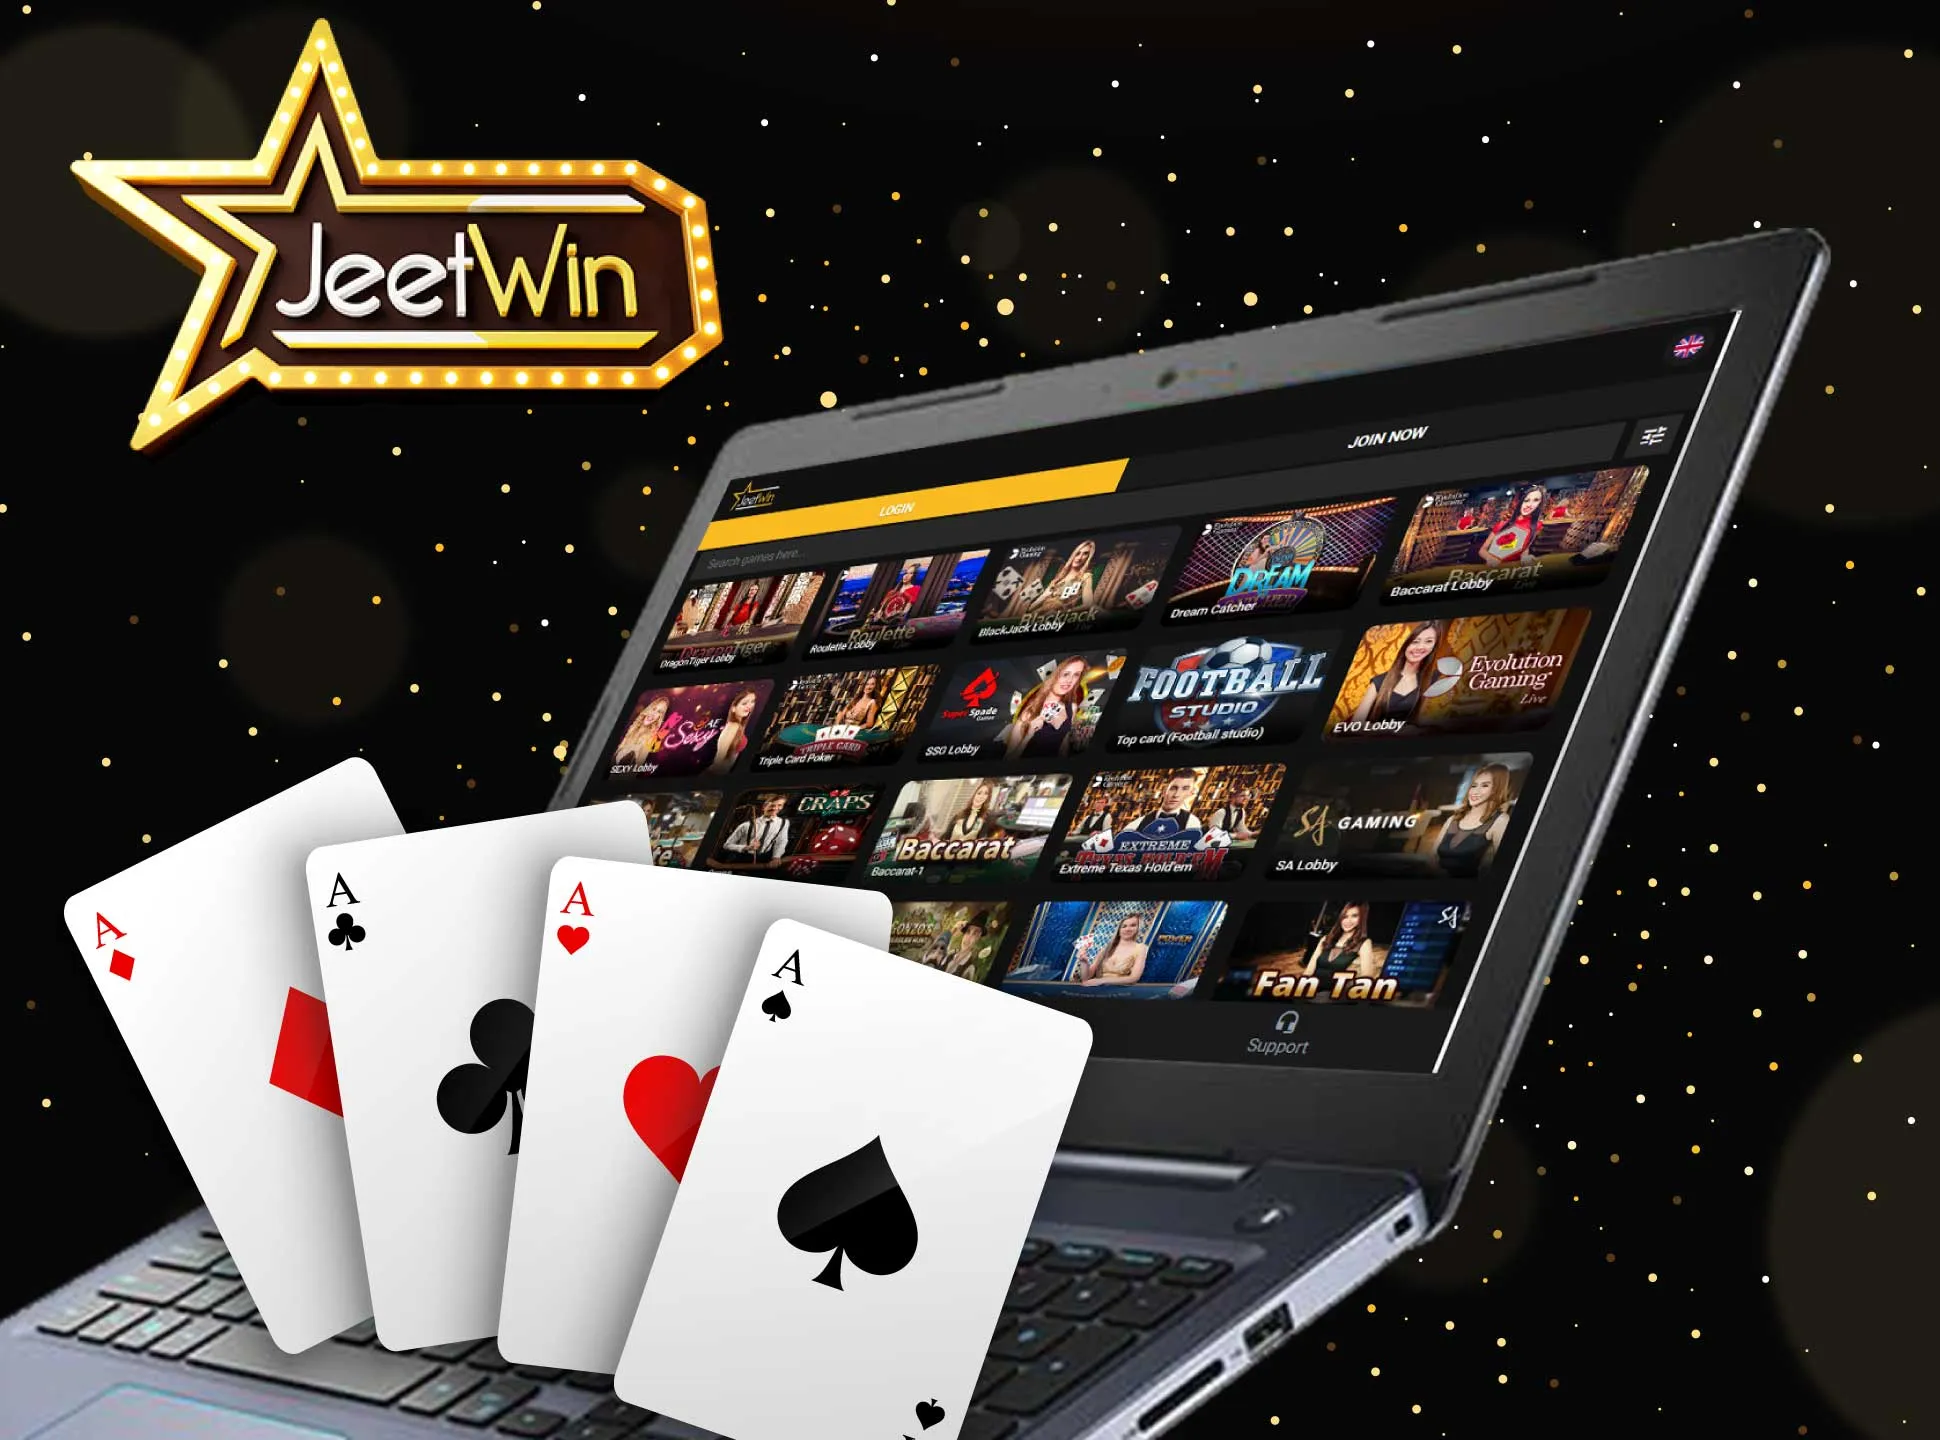 Jeetwin casino has all the popular casino games such as slots, poker, blackjack and other.